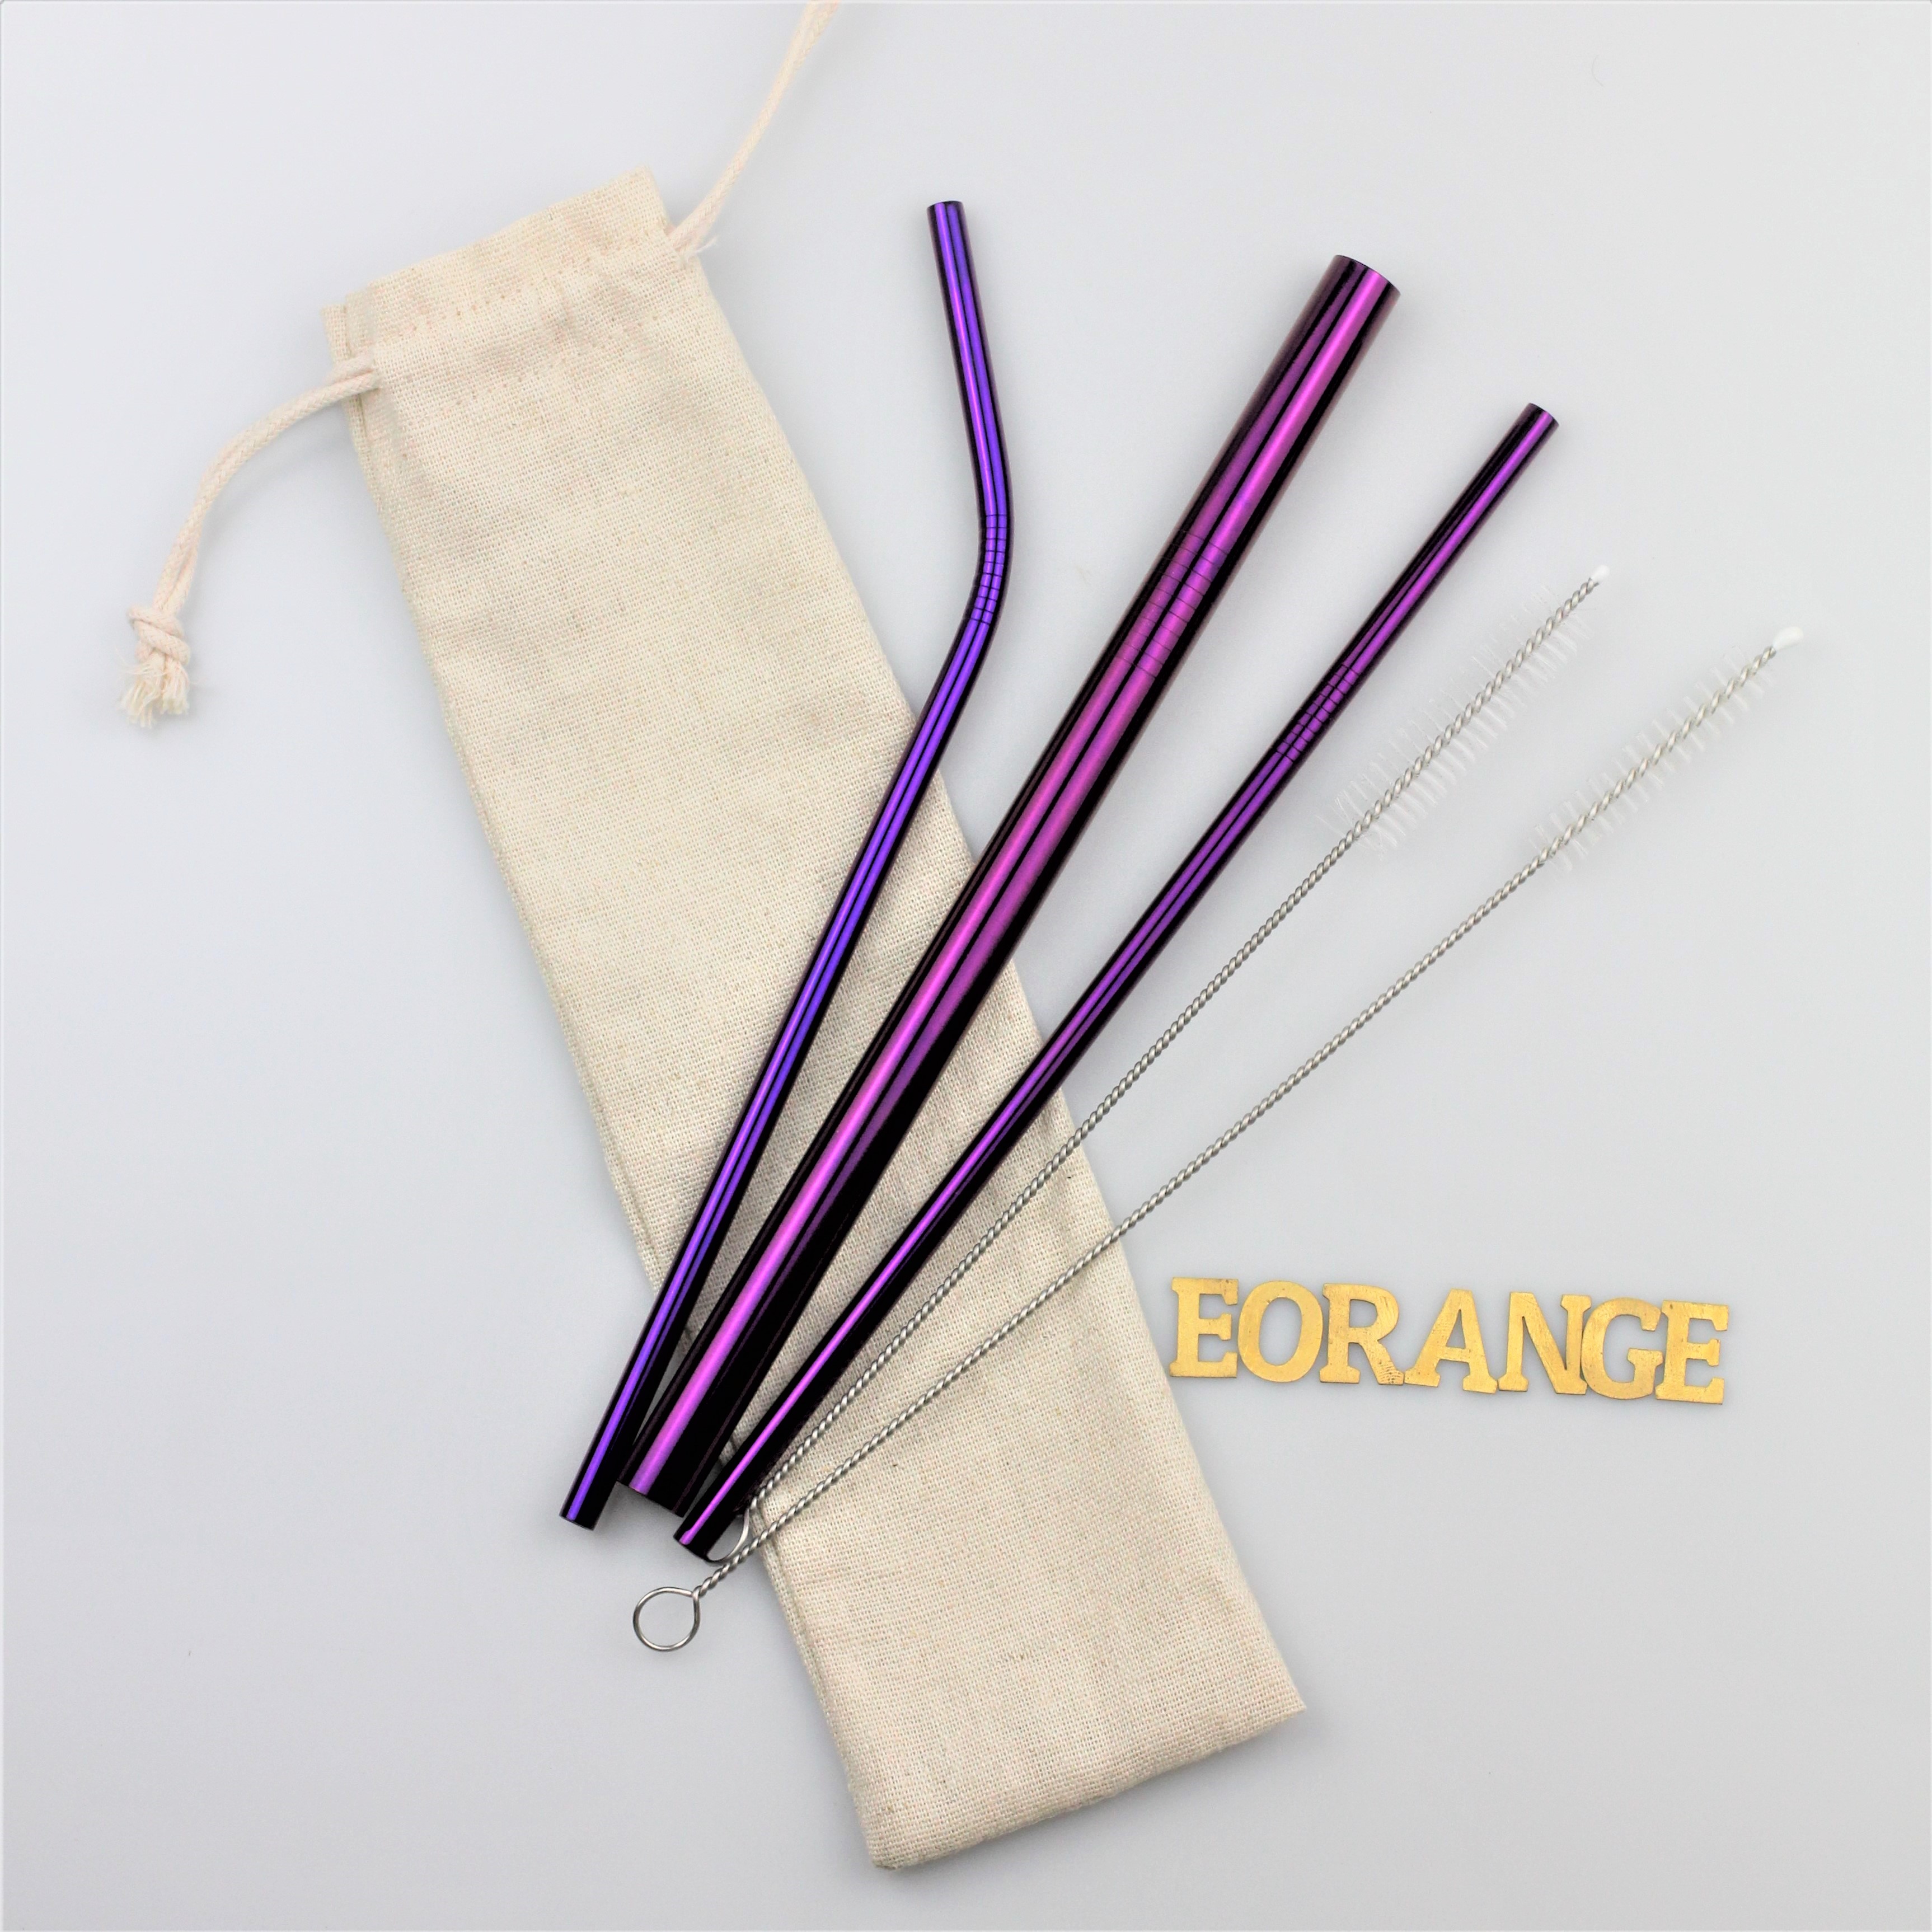 Get Customized company logo print Stainless Steel Straws metal in singapore Starts from 100pcs for wedding, company event, career fair, trade show, exhibition and conference.